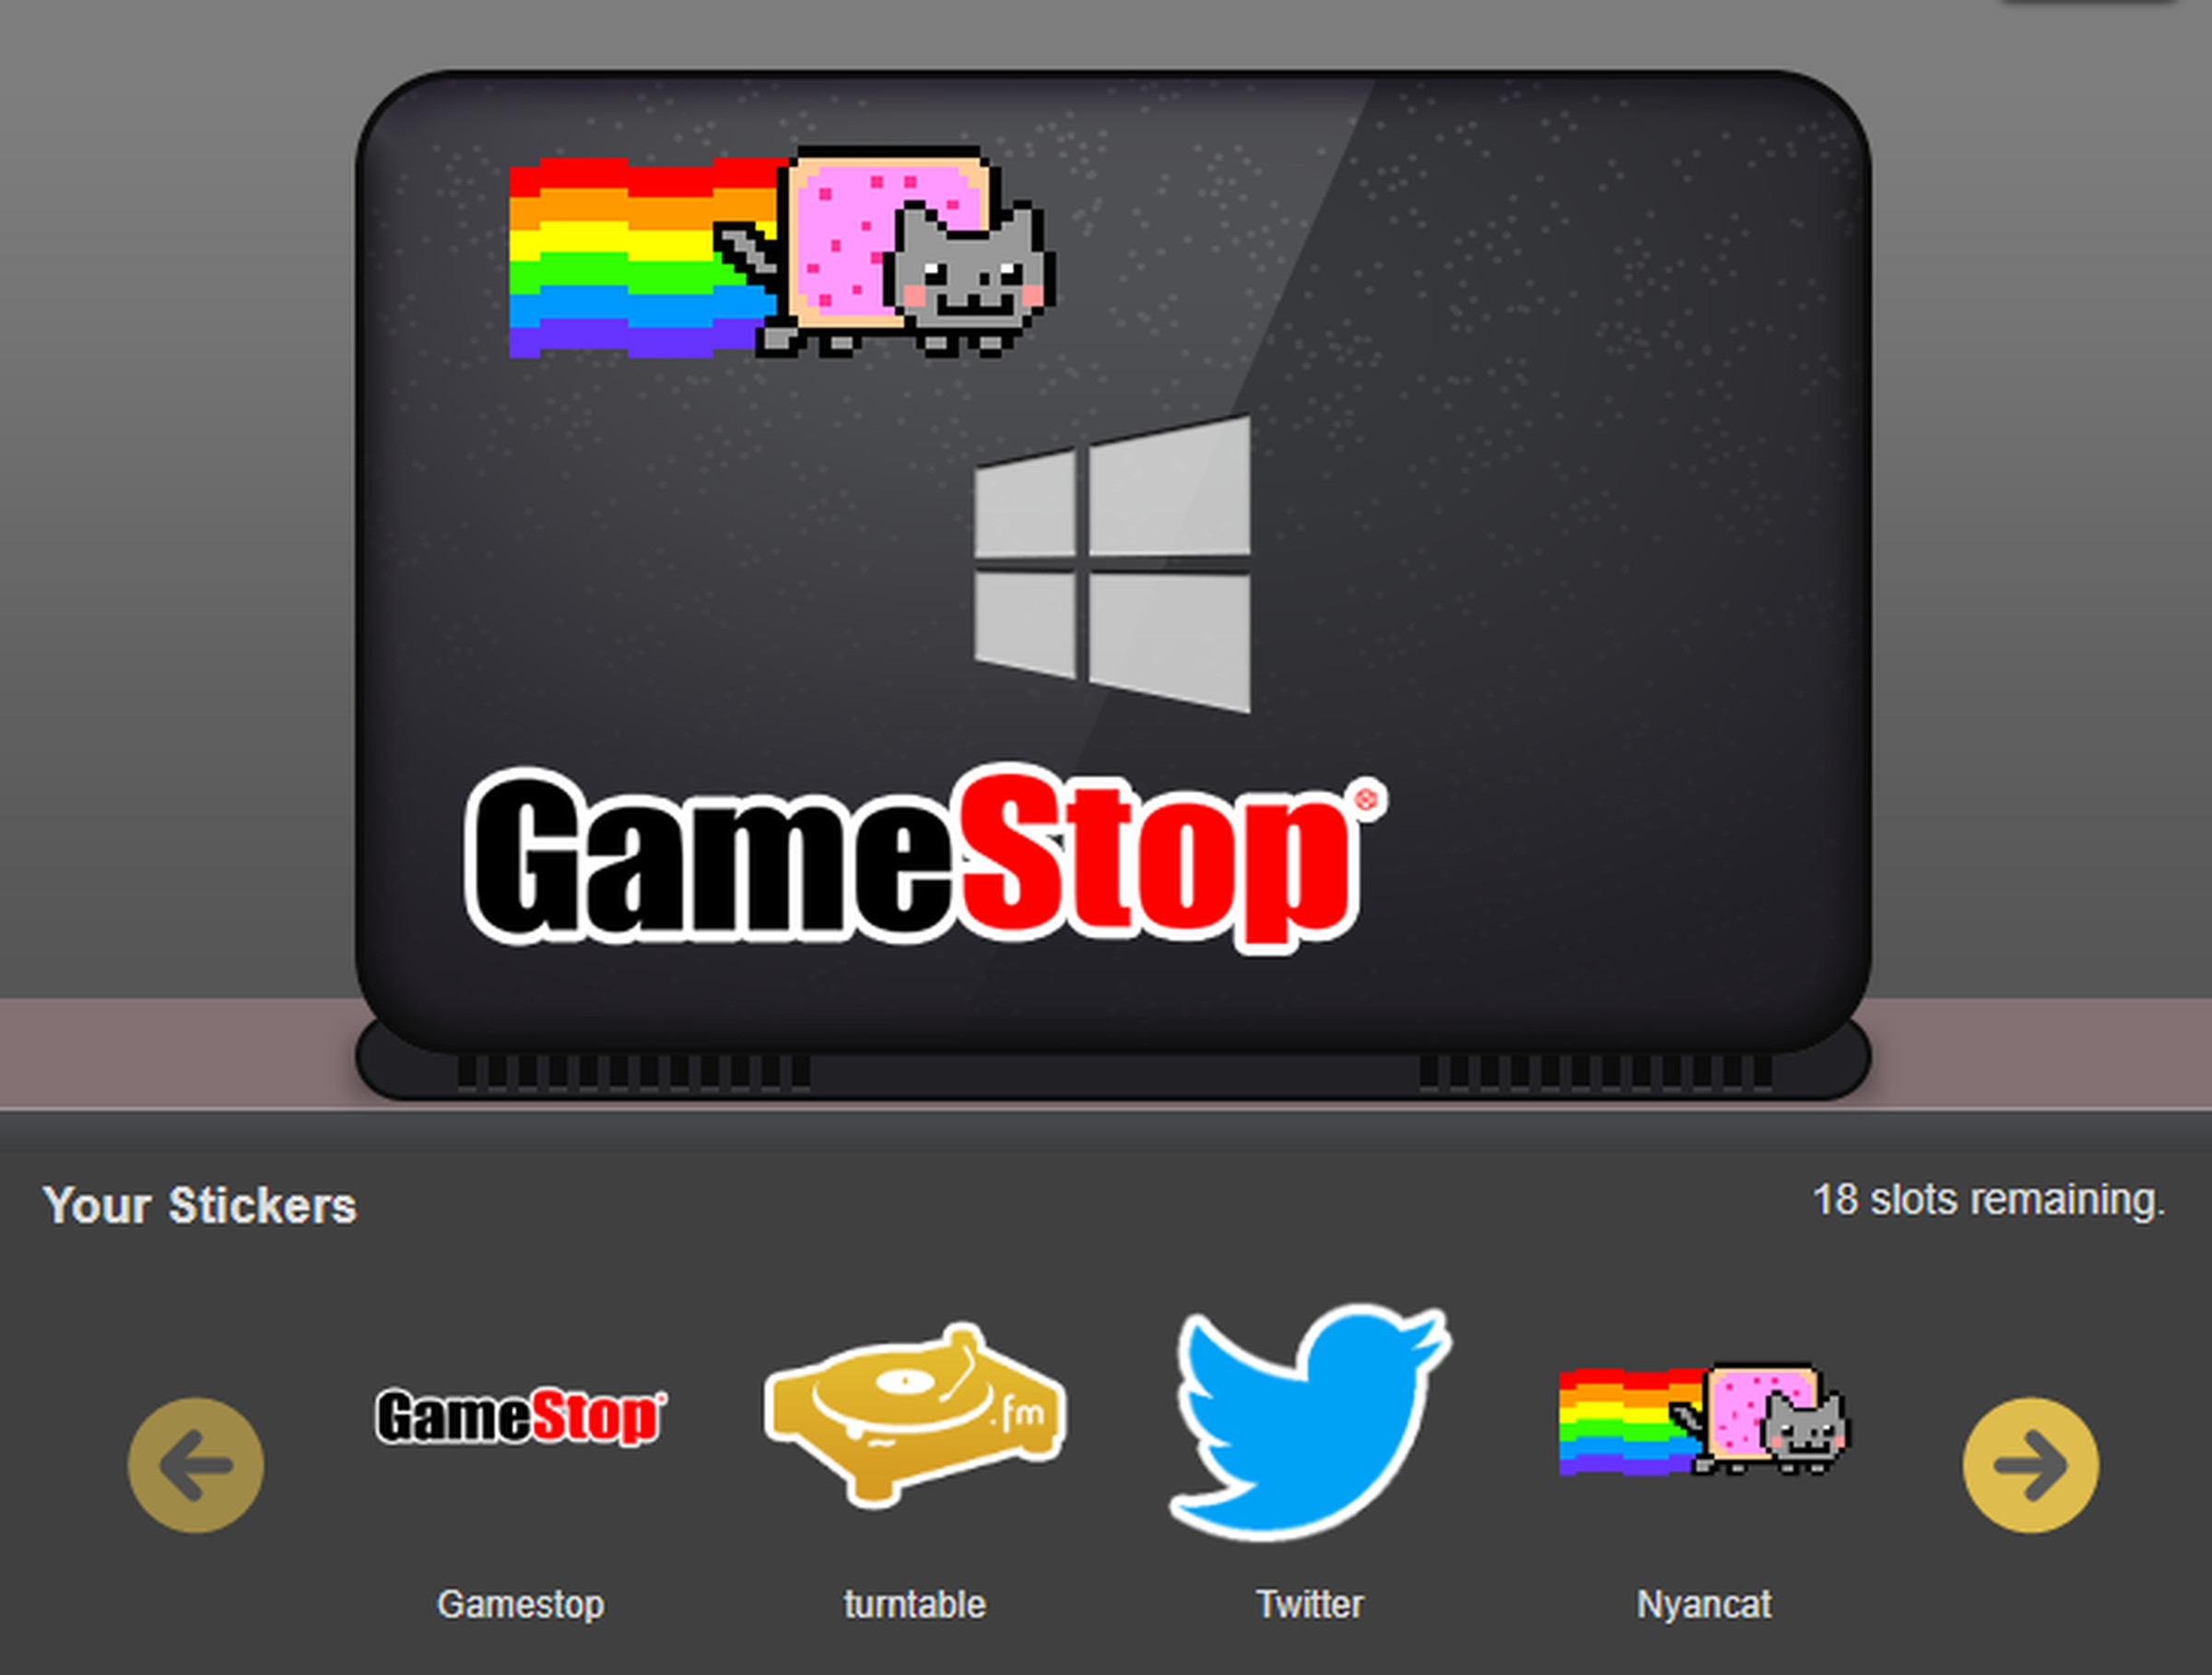 Nyan Cat and GameStop are both weirdly relevant in 2021.